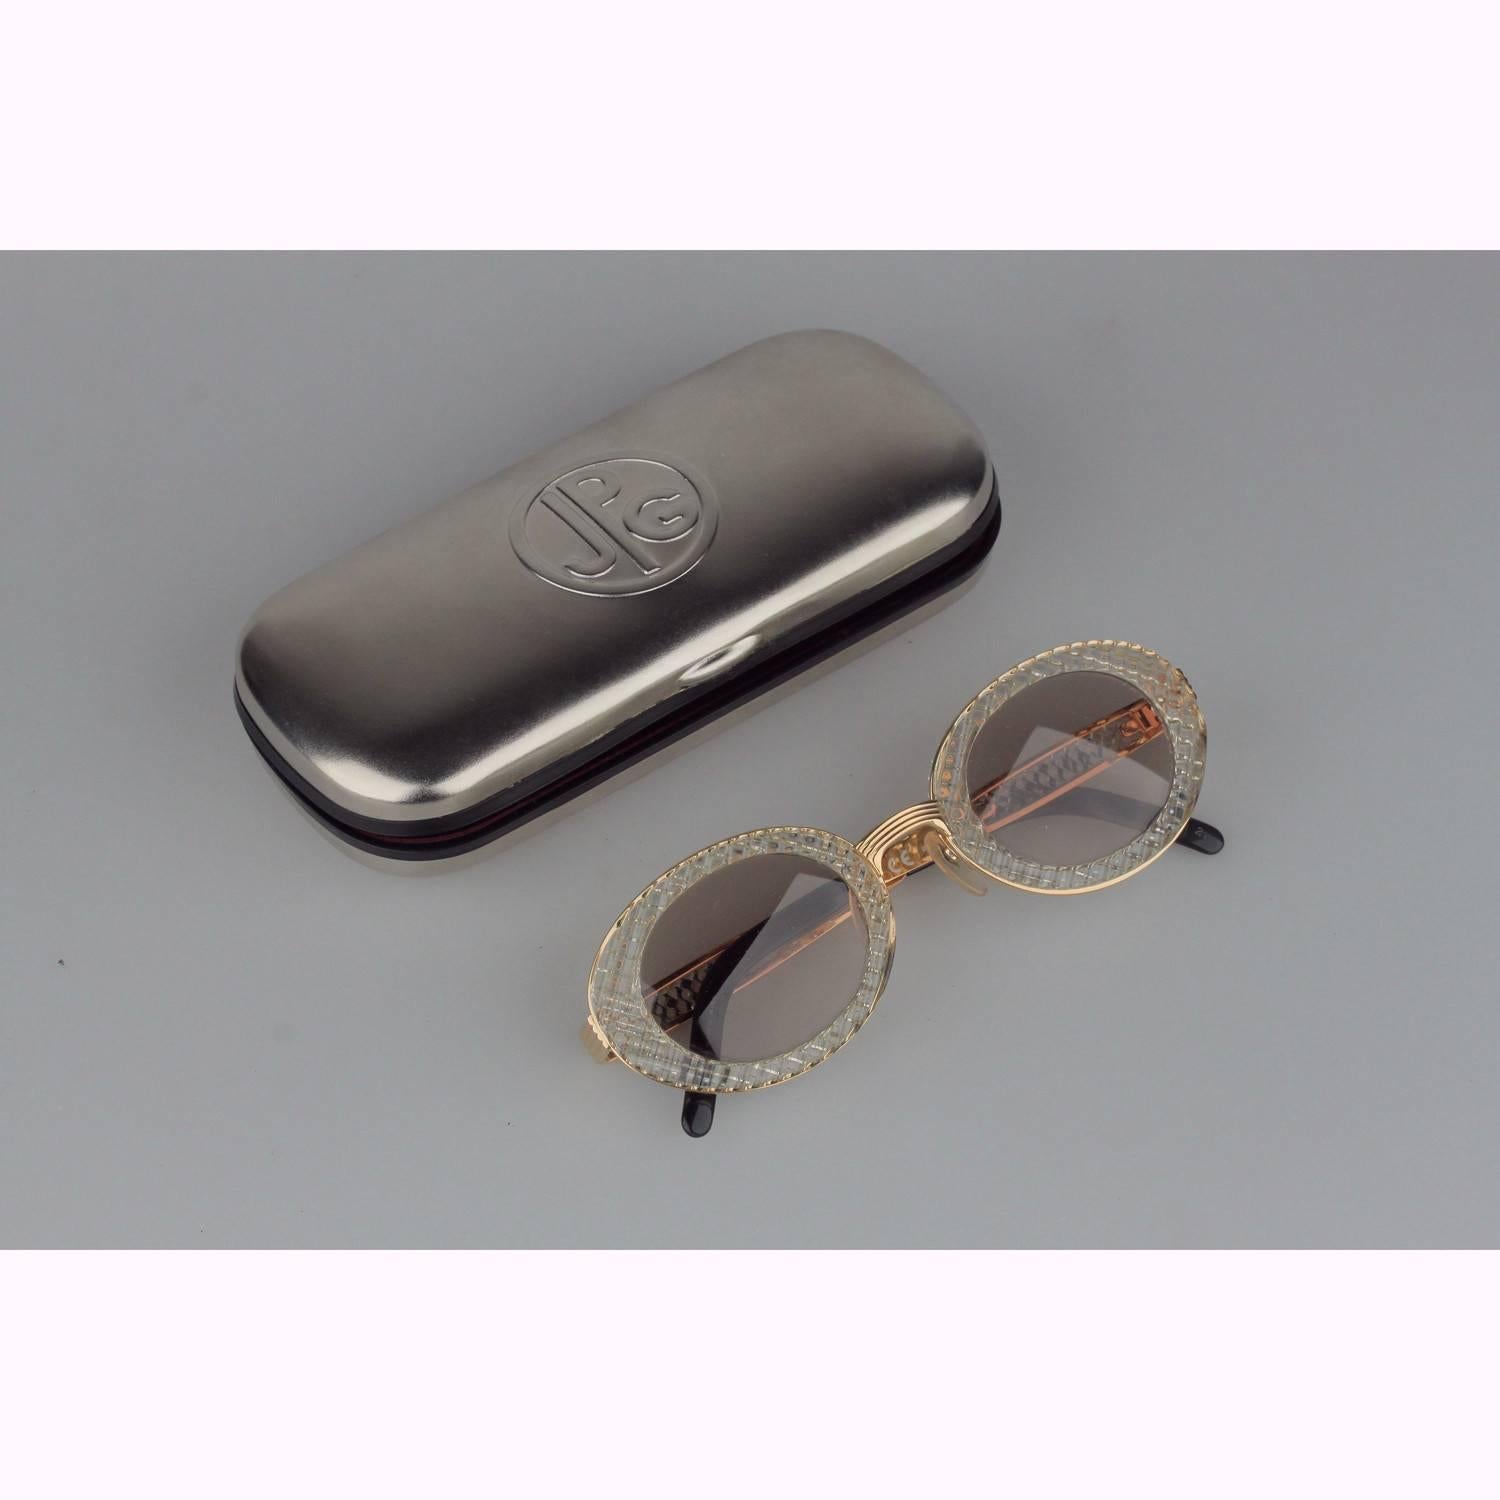 Original Vintage 1990s JEAN PAUL GAULTIER Unisex Sunglasses
Made in Japan
Gold metal Frame, with side screw system to incrfease or decrease arm length.
model: 56-4171

MATERIAL:
metal

COLOR:
Gold

LENS